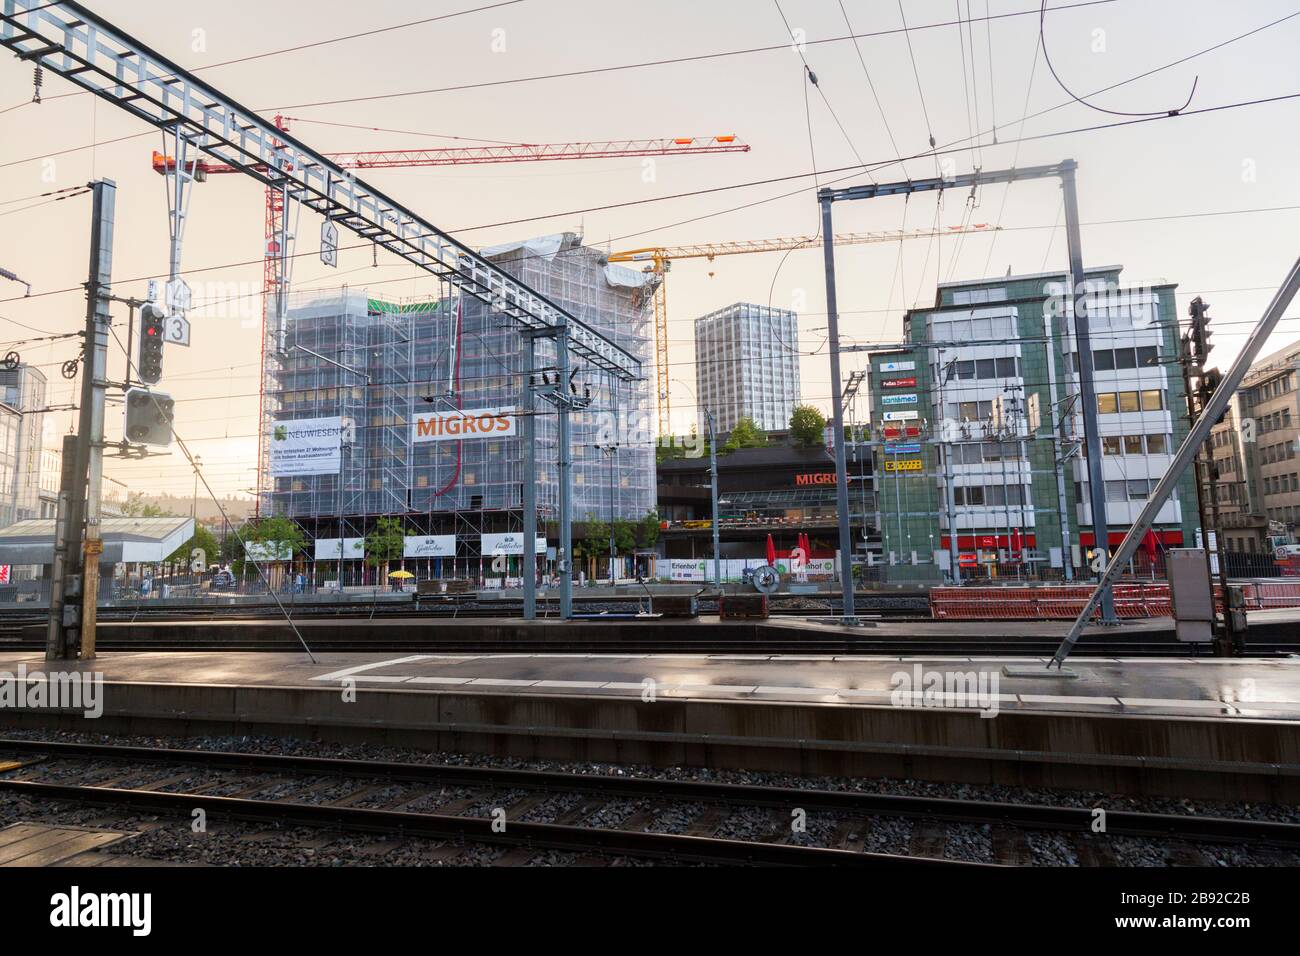 Tracks and overhead electric lines at the main train station (Hauptbahnhof) in Winterthur, Switzerland. Stock Photo